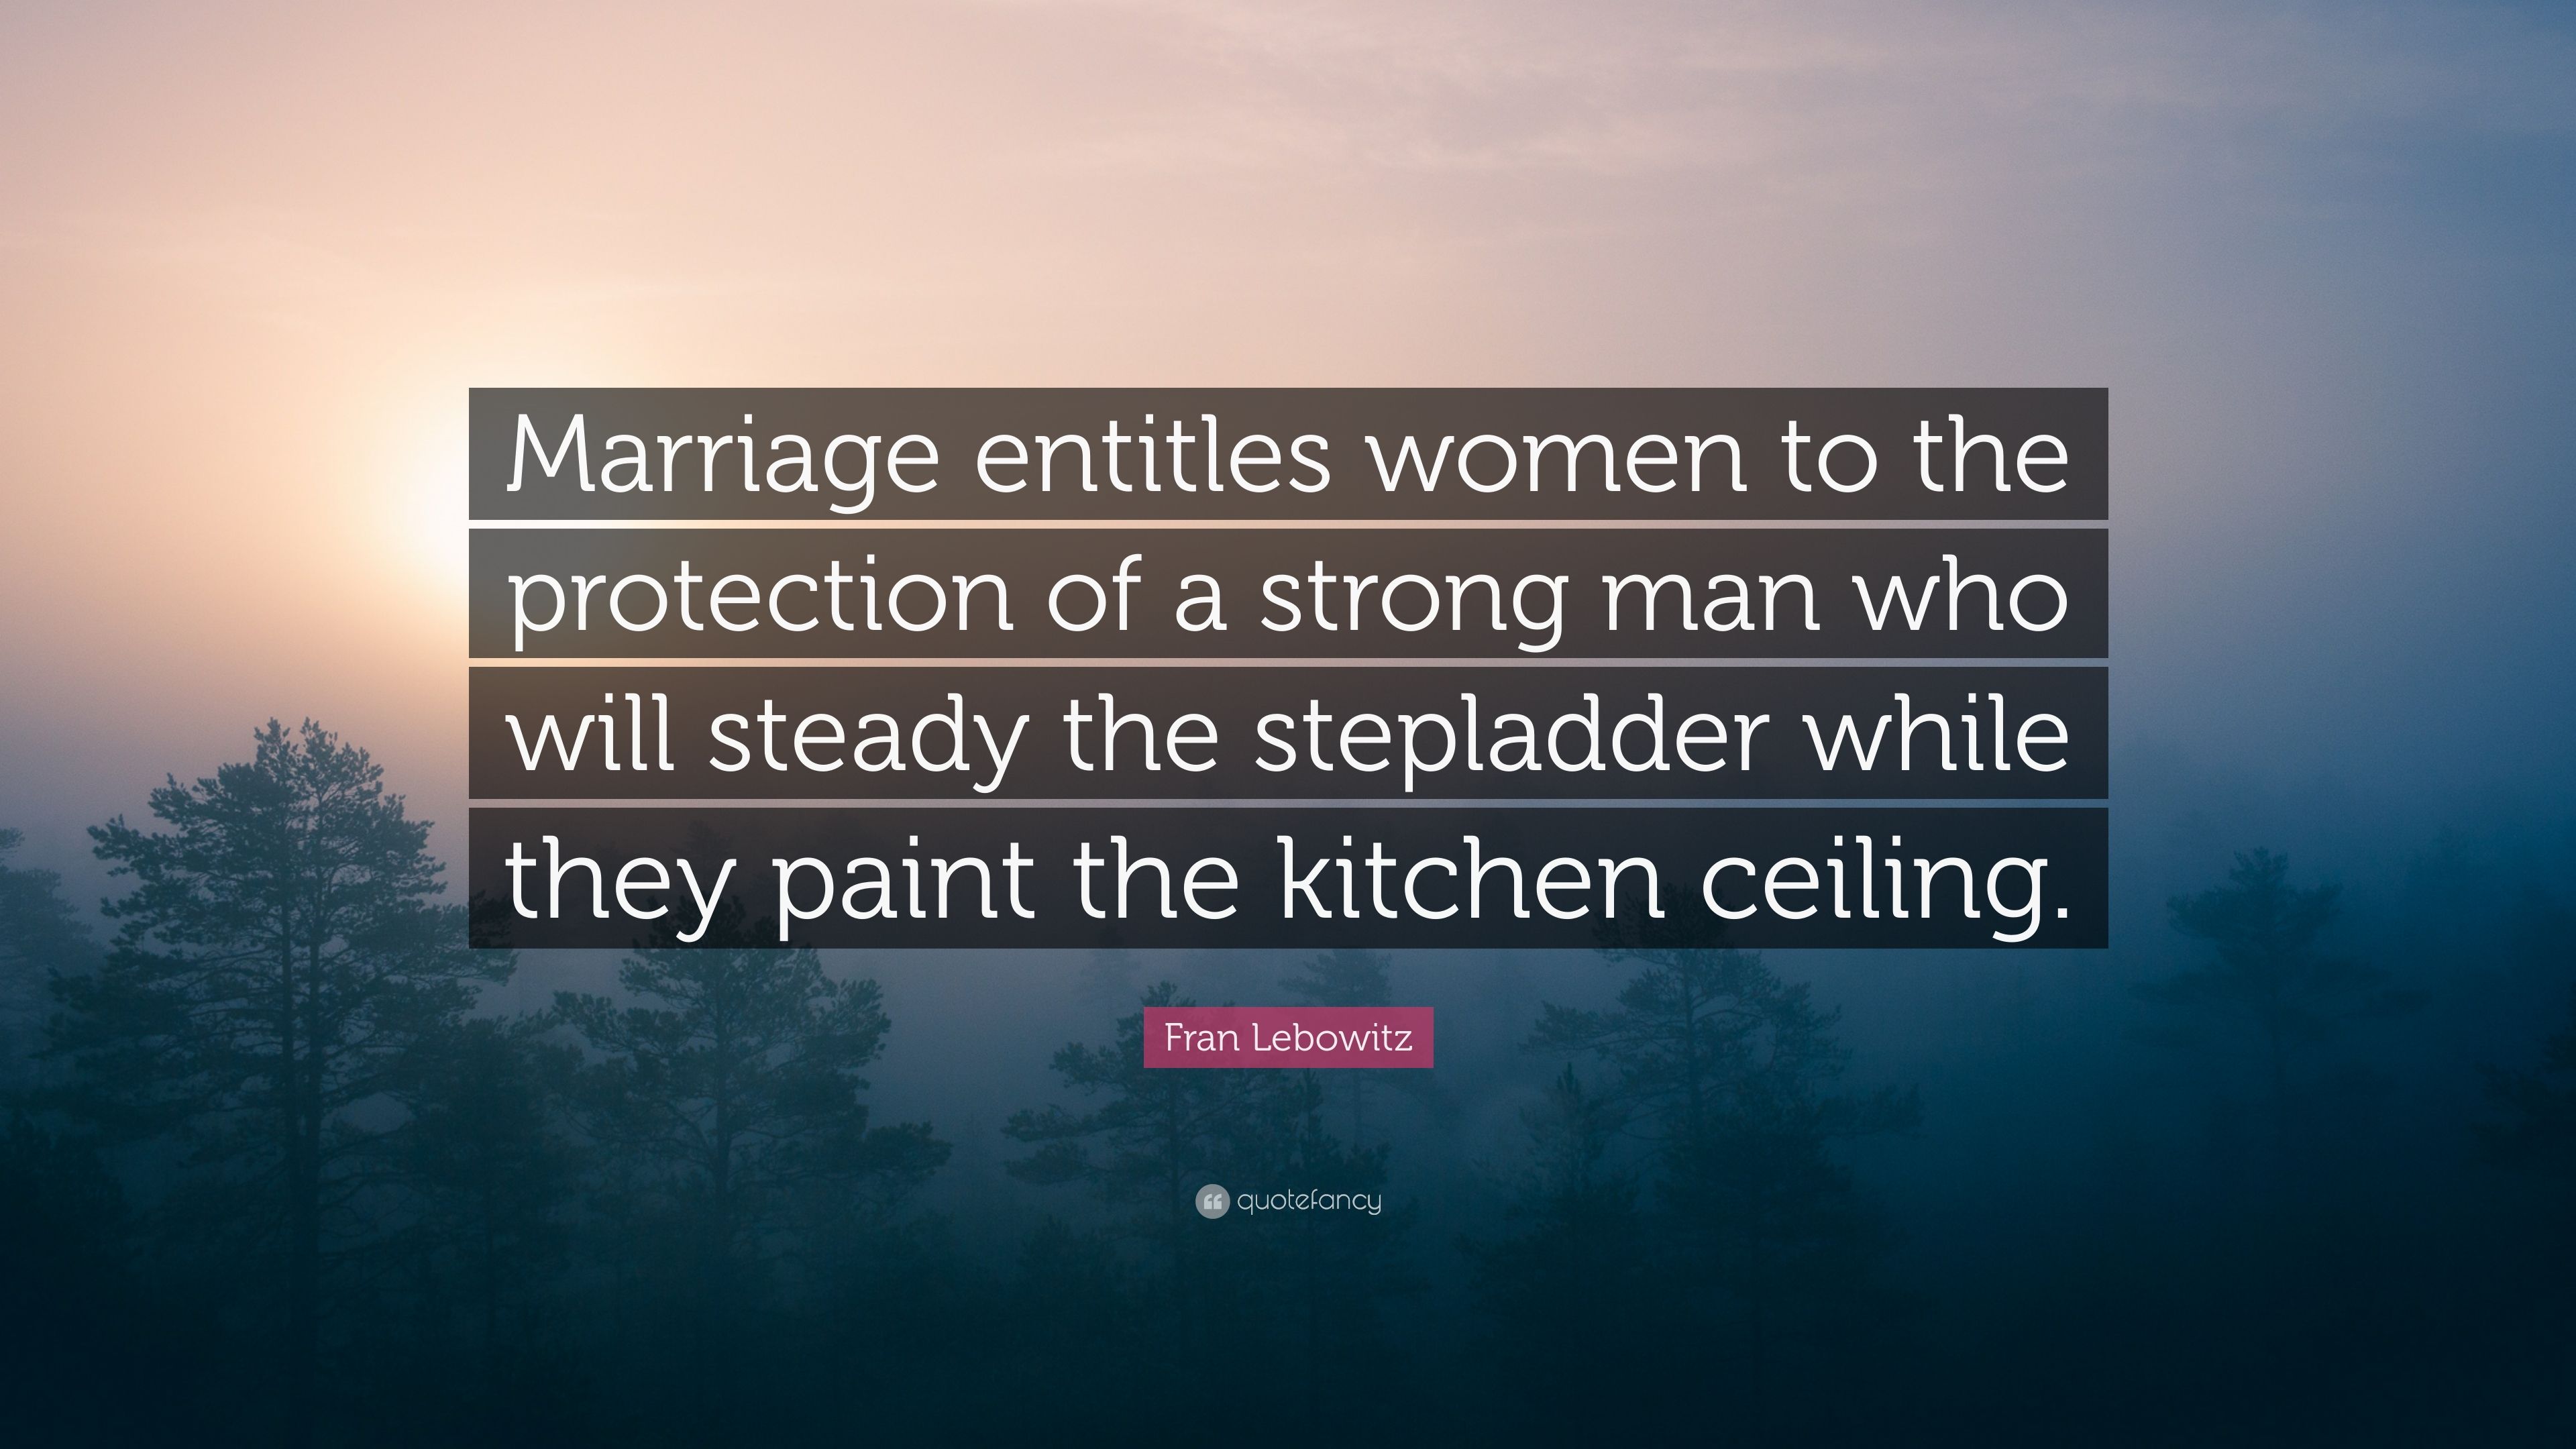 Fran Lebowitz Quote: “Marriage entitles women to the protection